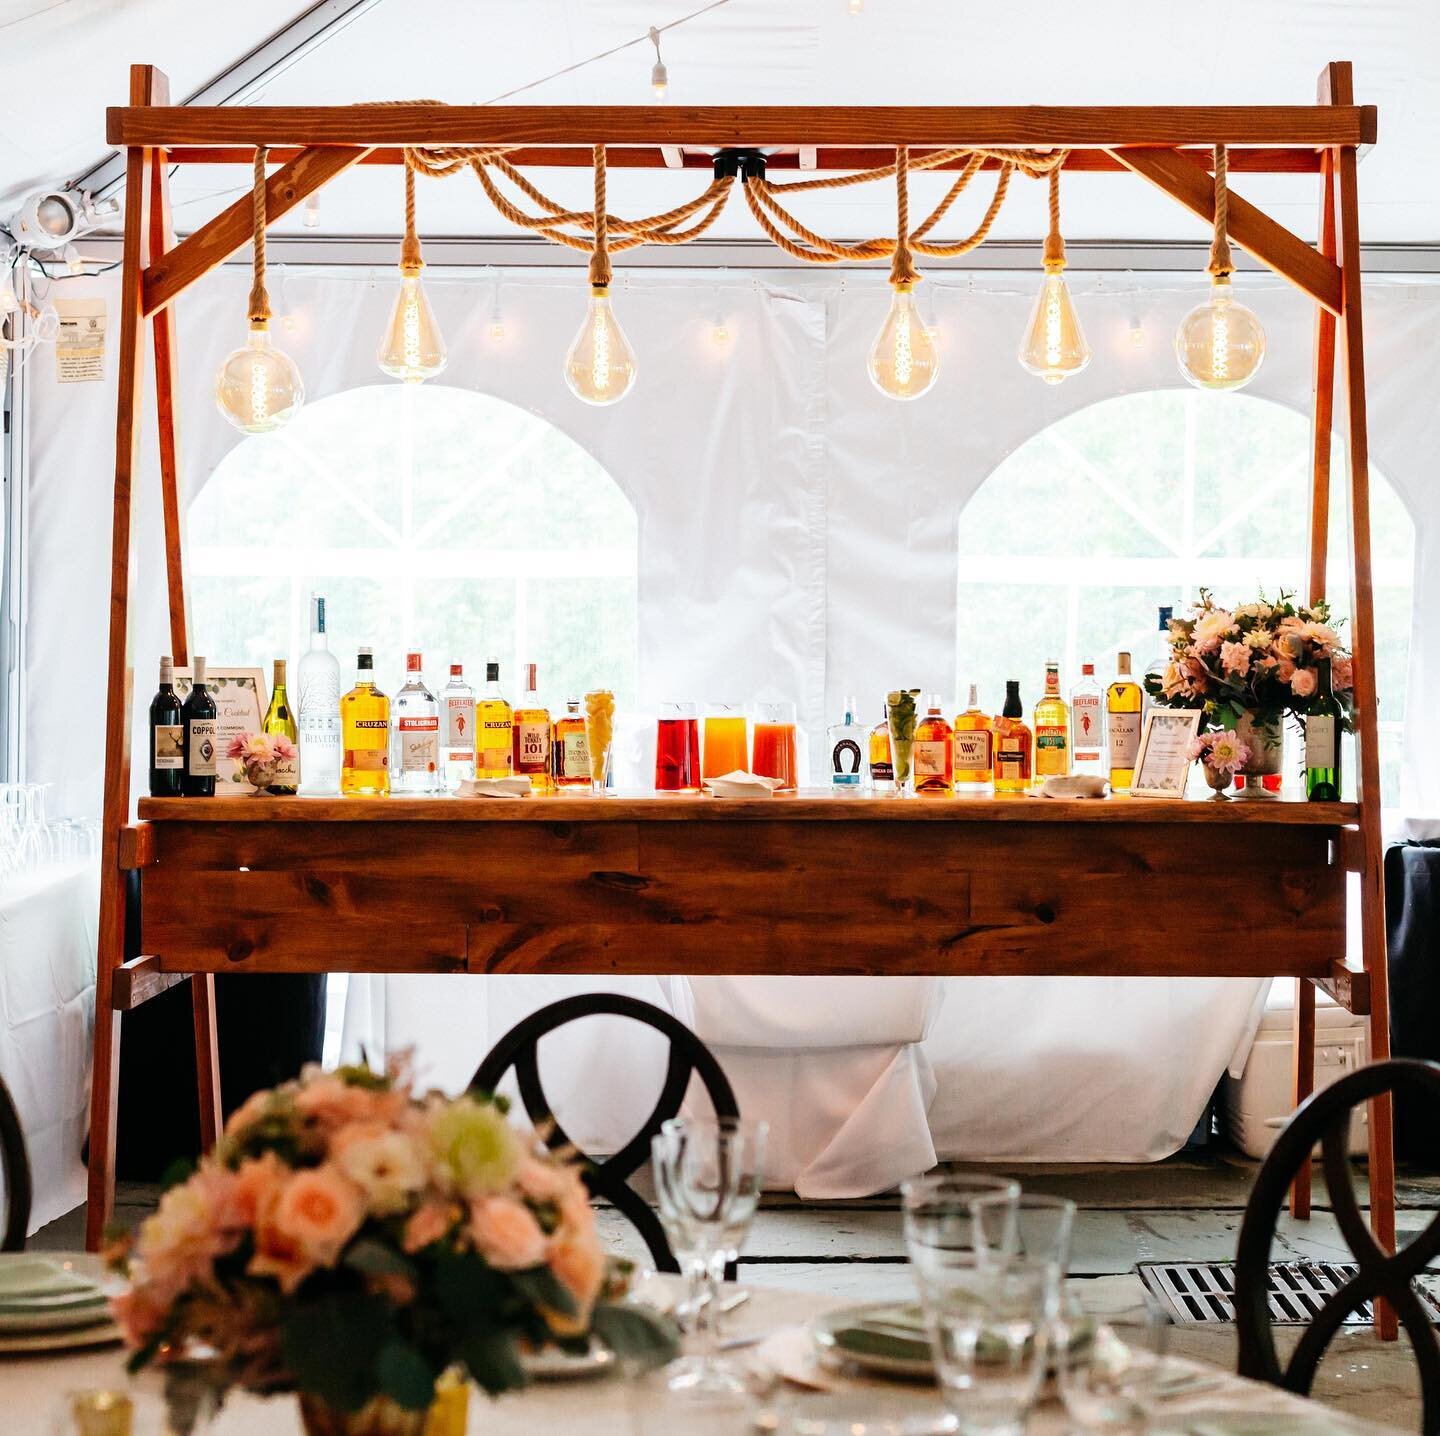 Must have this Unique Customize Bar at your next weddings and events&hellip;Live Edge Wood with Edison Lights #livedgewood #woodbar #weddingbar #customizebar #uniquebar #original #eventprops #weddingreceptiondecor #americanmade #musthave @rreventsnyc